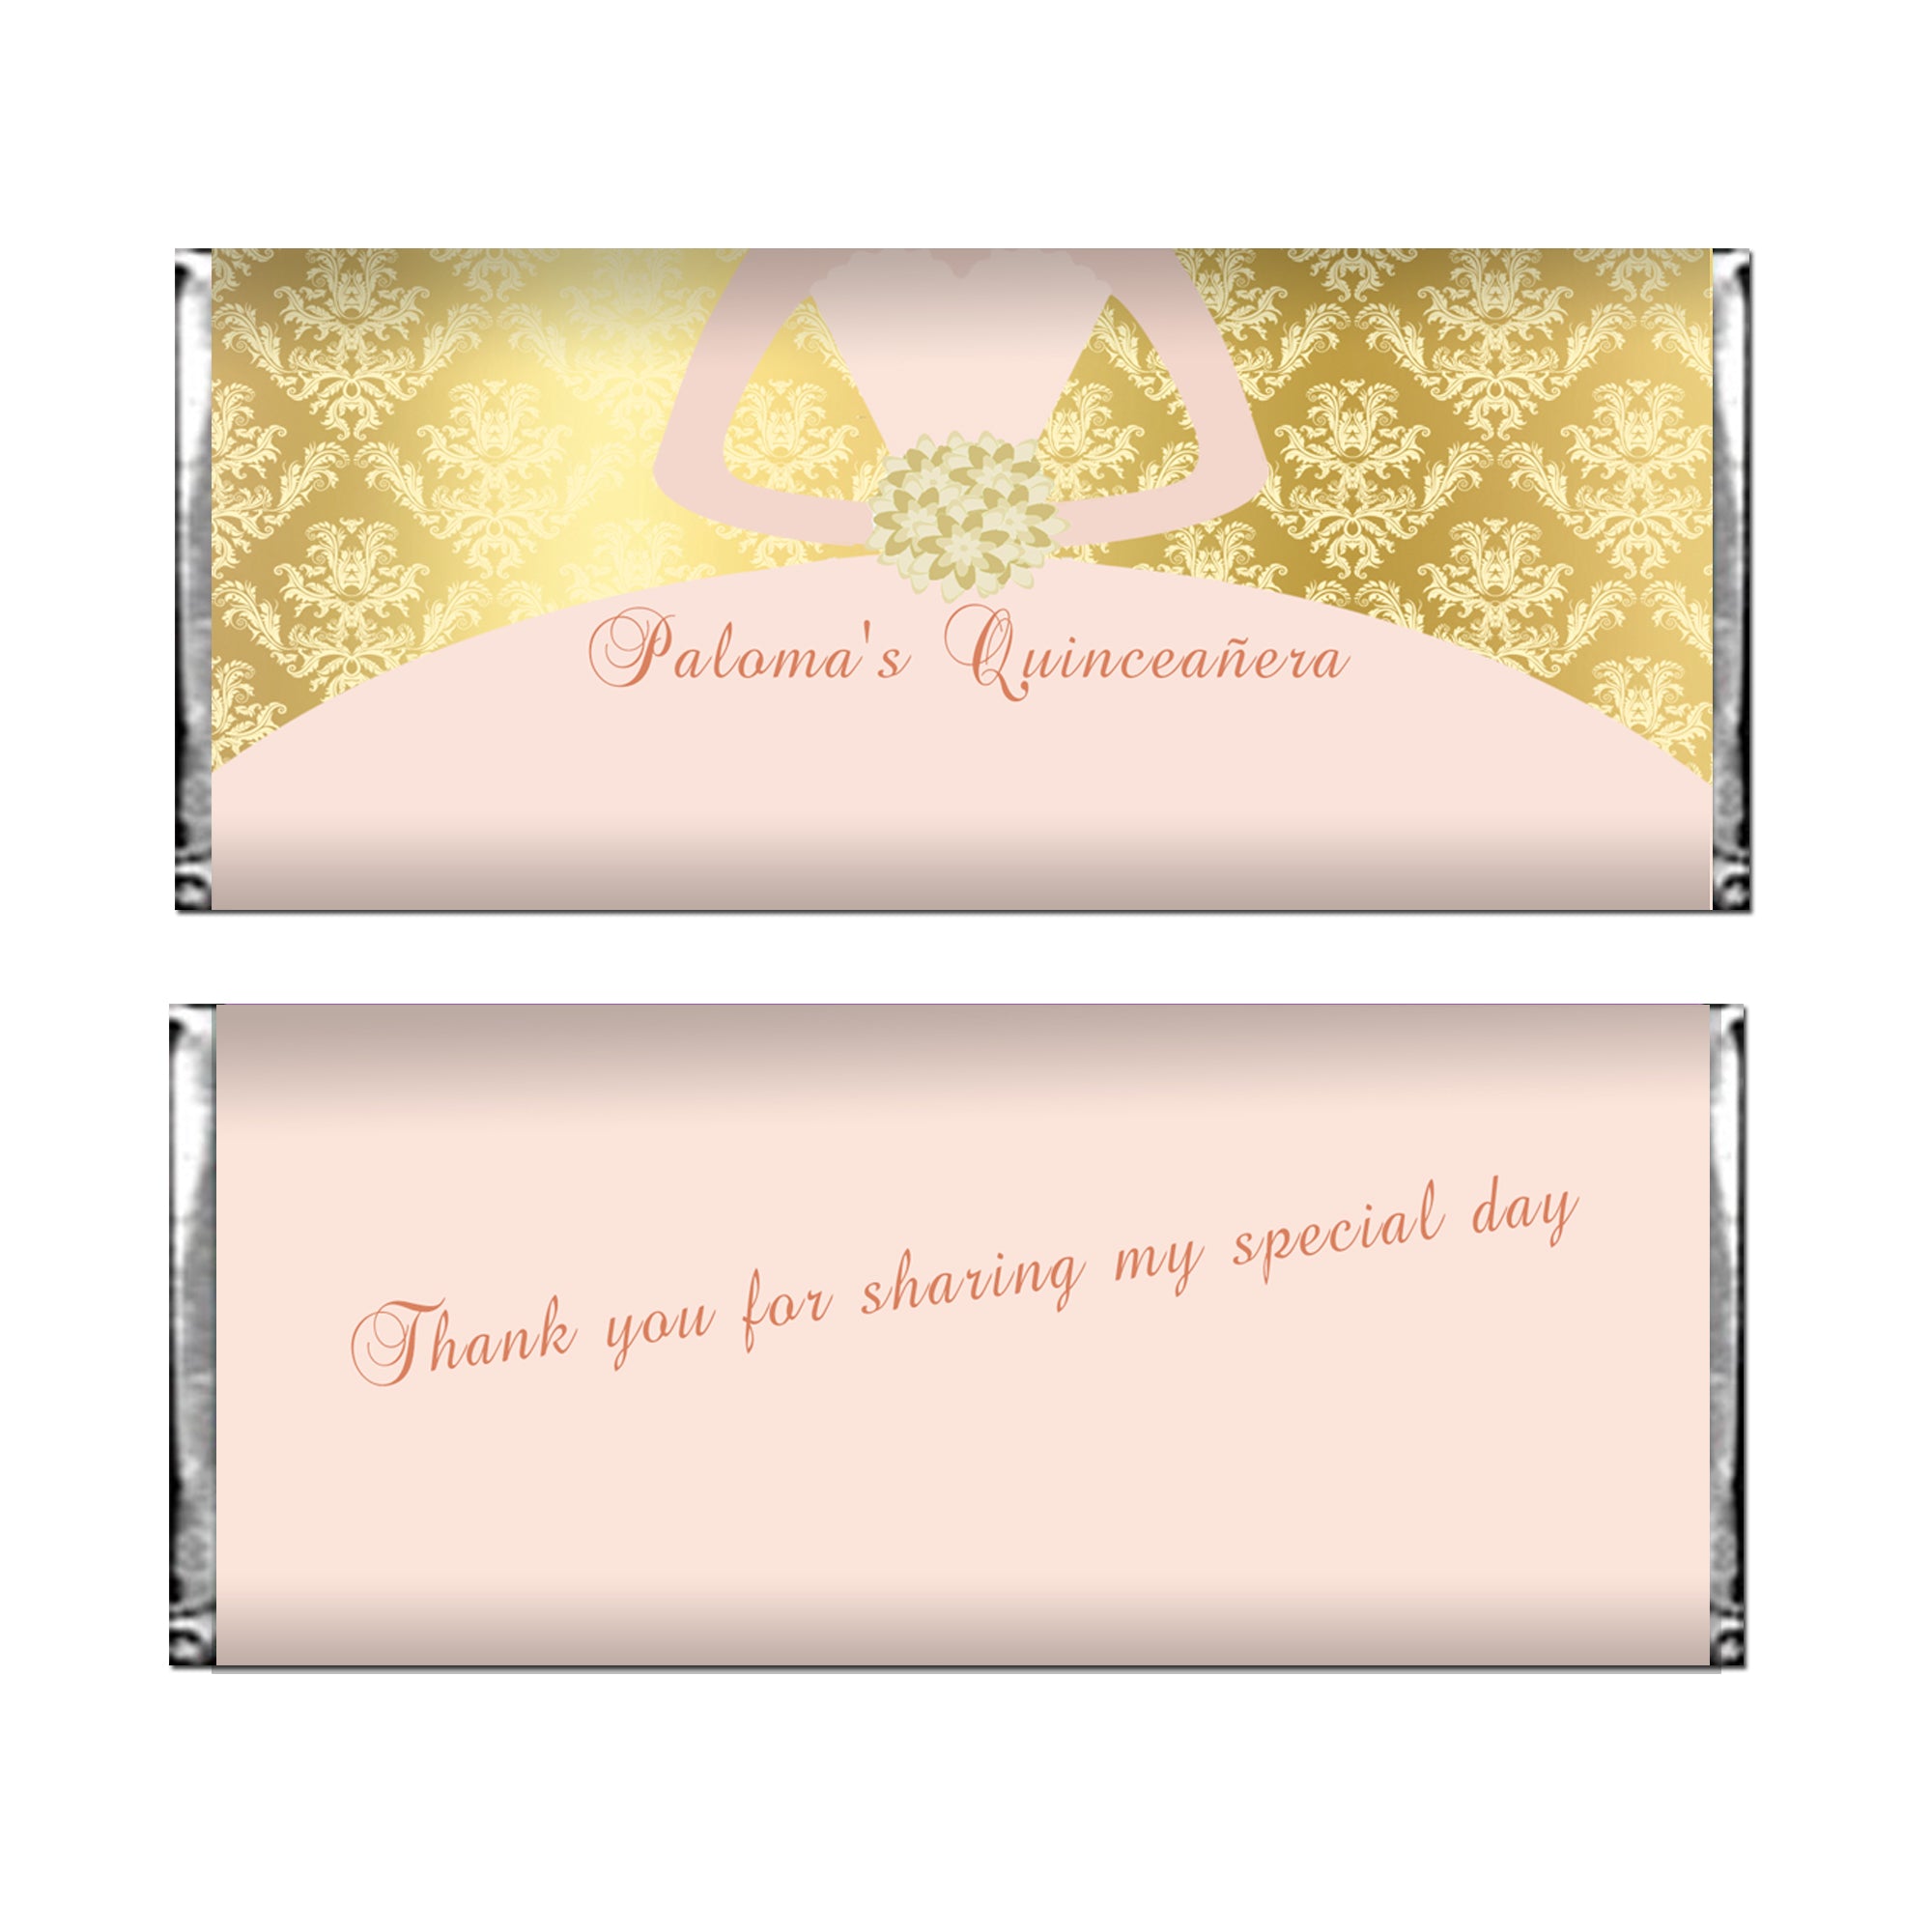 30 Candy bar wrappers quinceañera pink gold